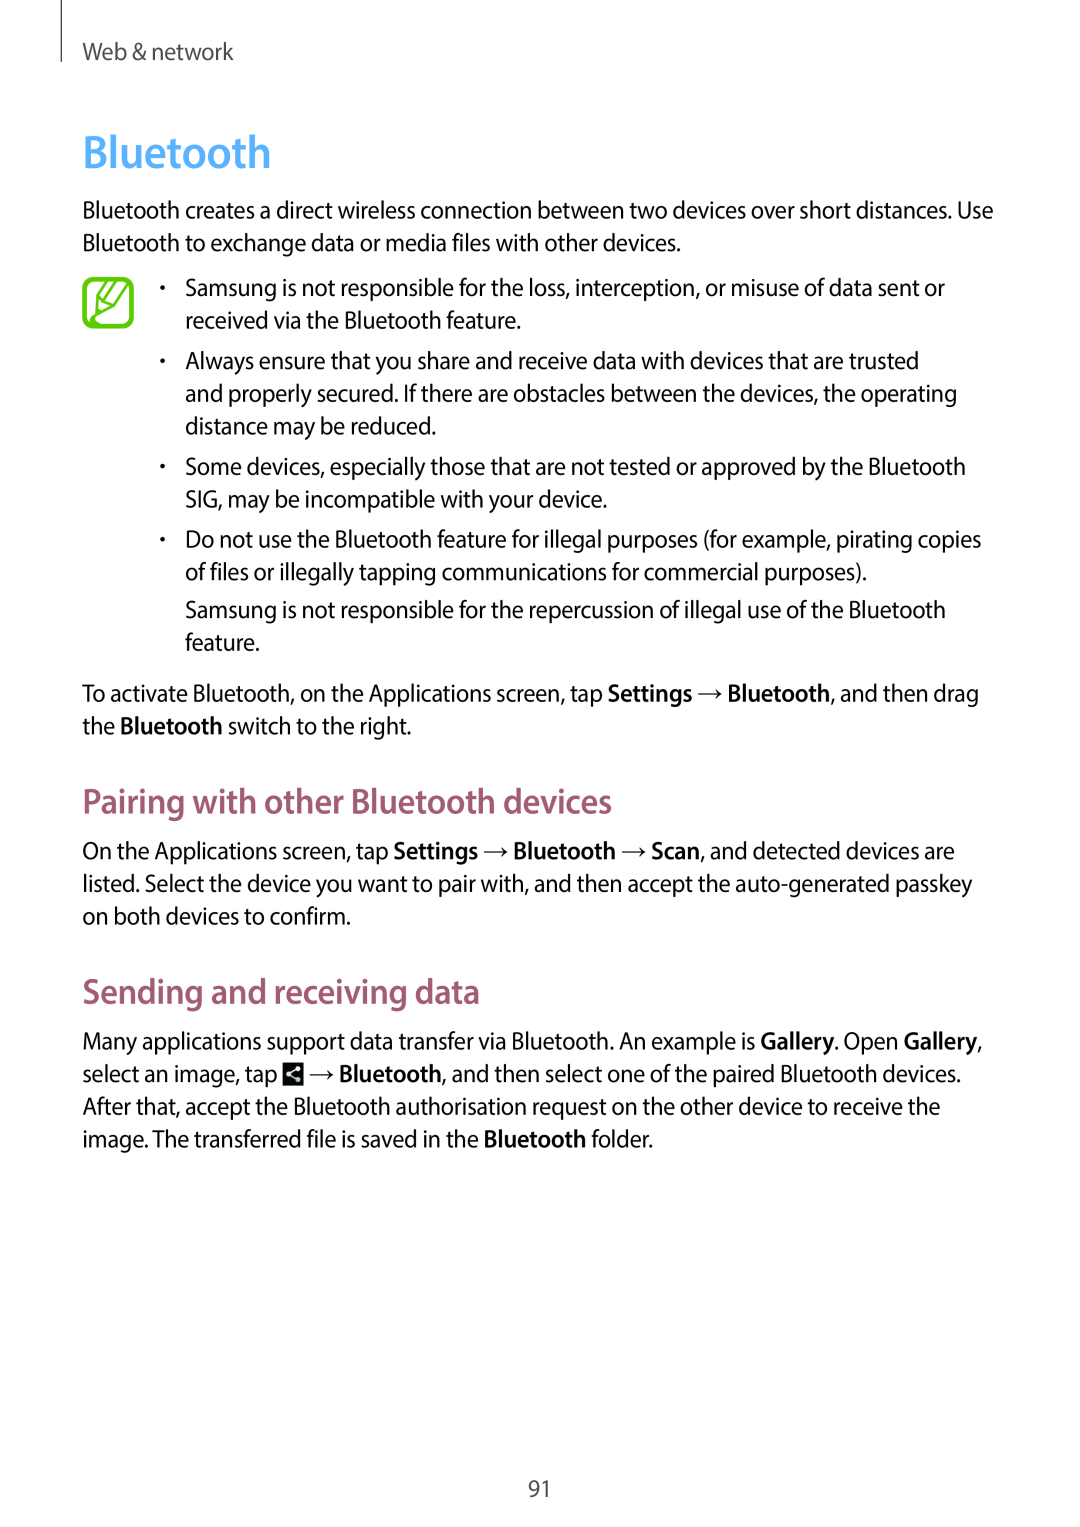 Samsung EK-GC100 user manual Pairing with other Bluetooth devices, Sending and receiving data, Web & network 